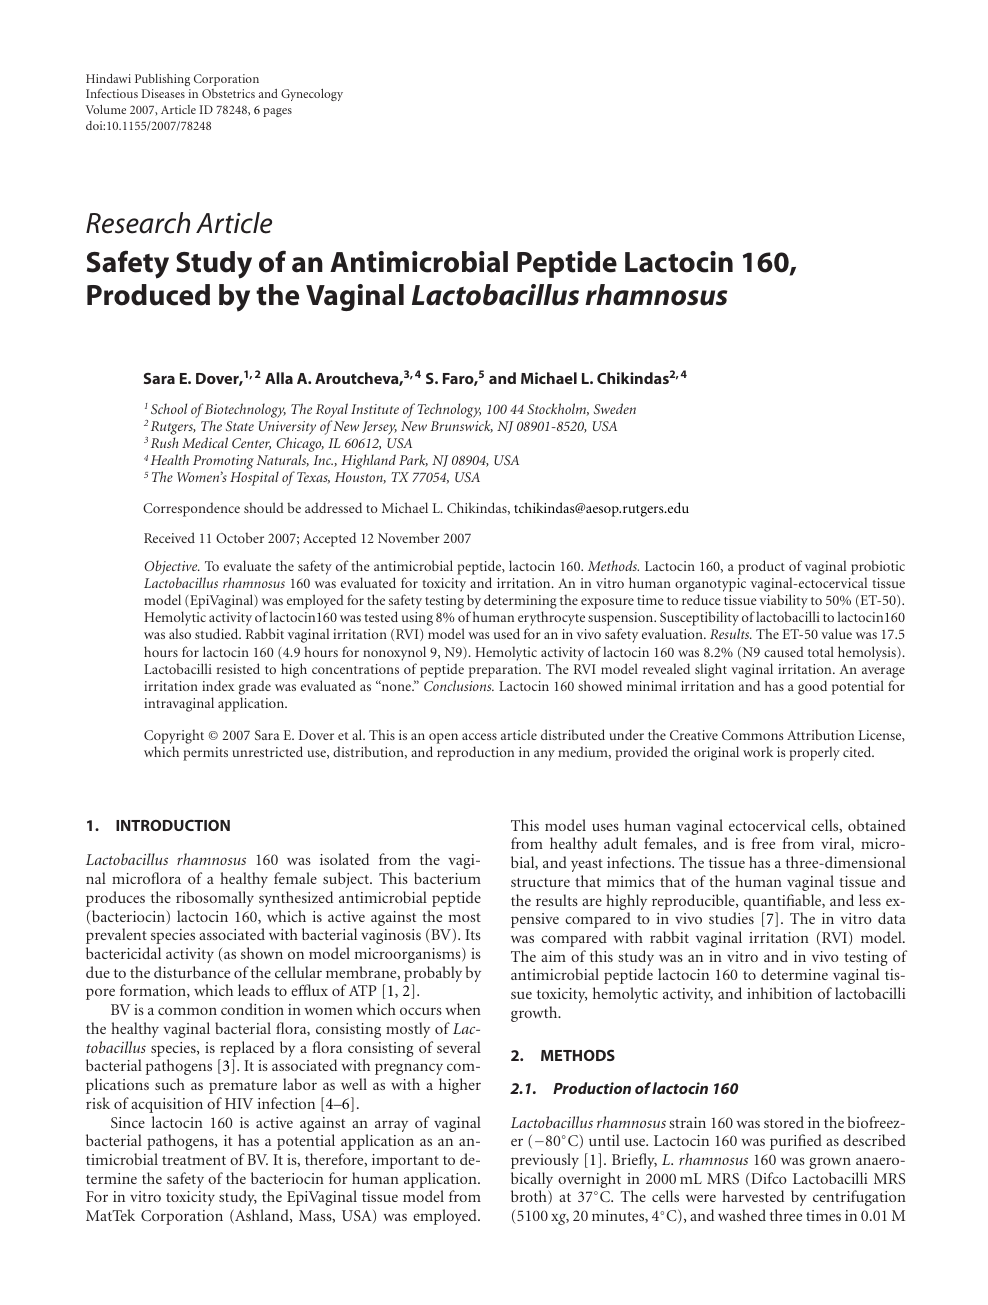 Safety Study Of An Antimicrobial Peptide Lactocin 160 Produced By The Vaginal Lactobacillus Rhamnosus Topic Of Research Paper In Veterinary Science Download Scholarly Article Pdf And Read For Free On Cyberleninka